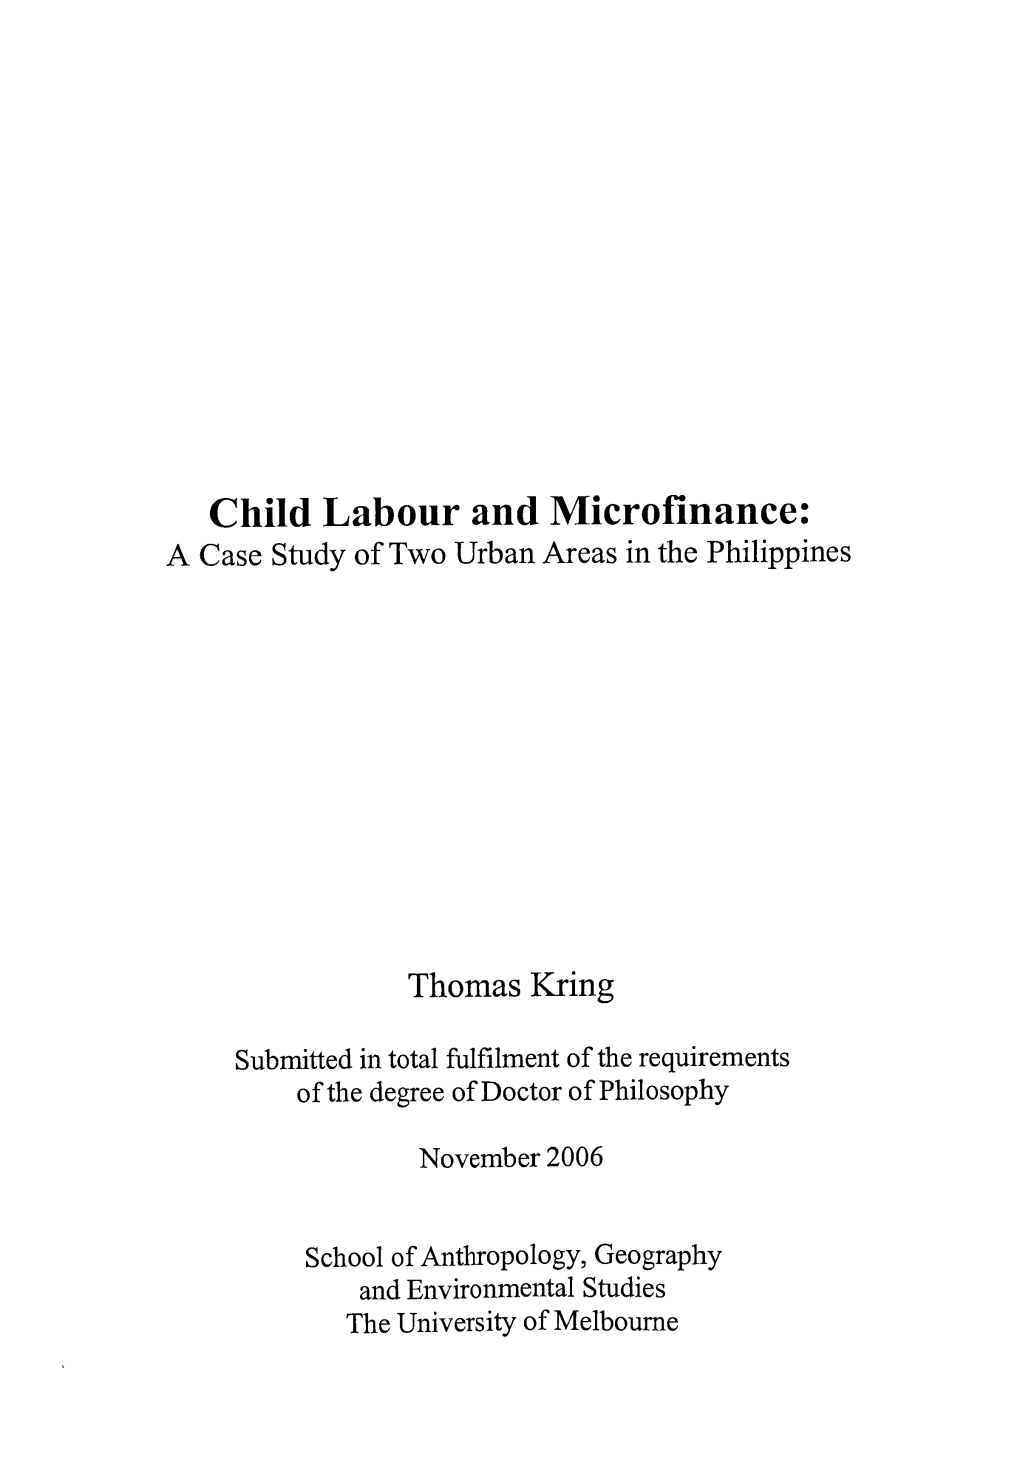 Child Labour and Microfinance: a Case Study of Two Urban Areas in the Philippines